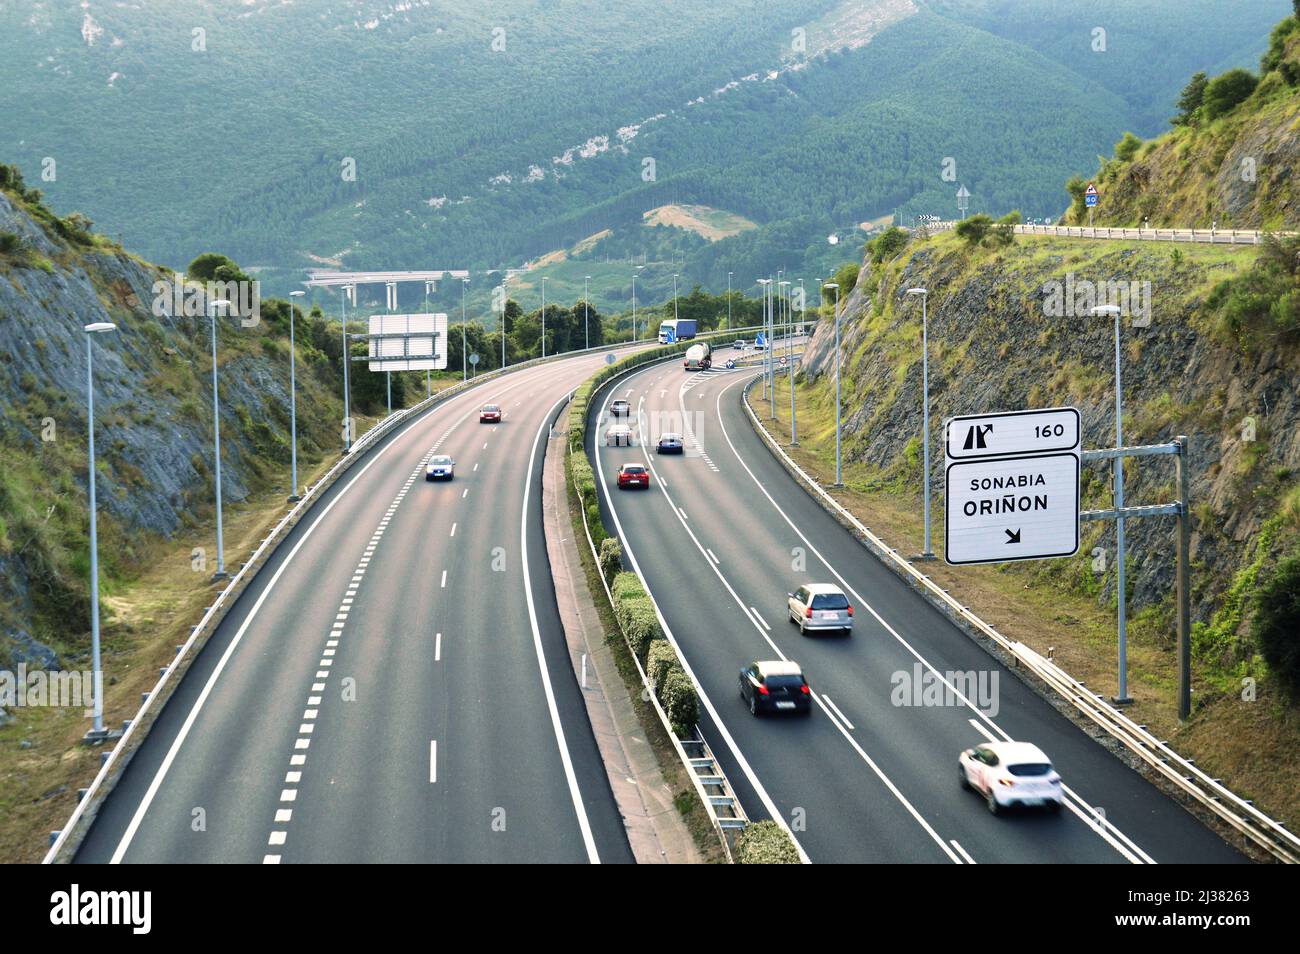 Autovía del Cantábrico - A8, main highway in the Cantabria region in the north of Spain. Stock Photo